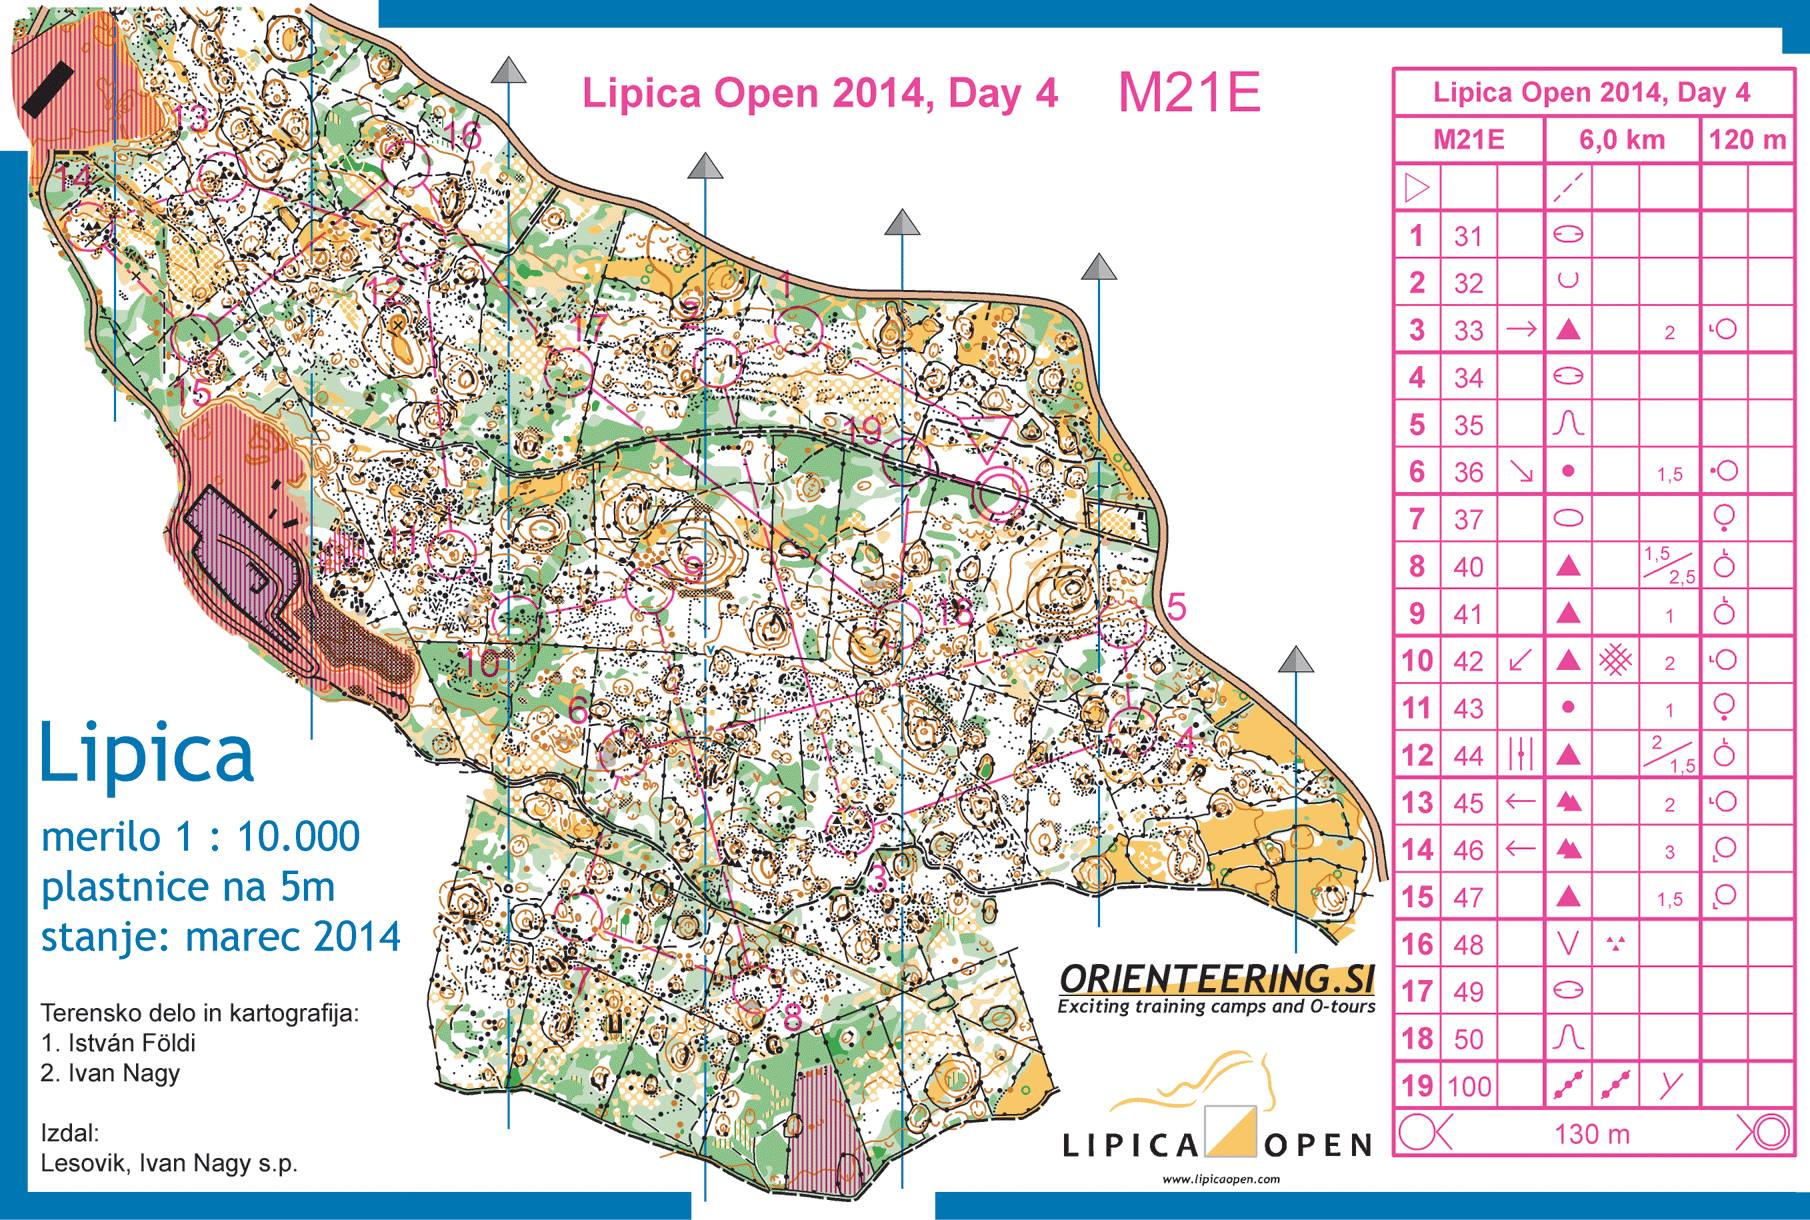 Lipica open - Stage 4 (11/03/2014)